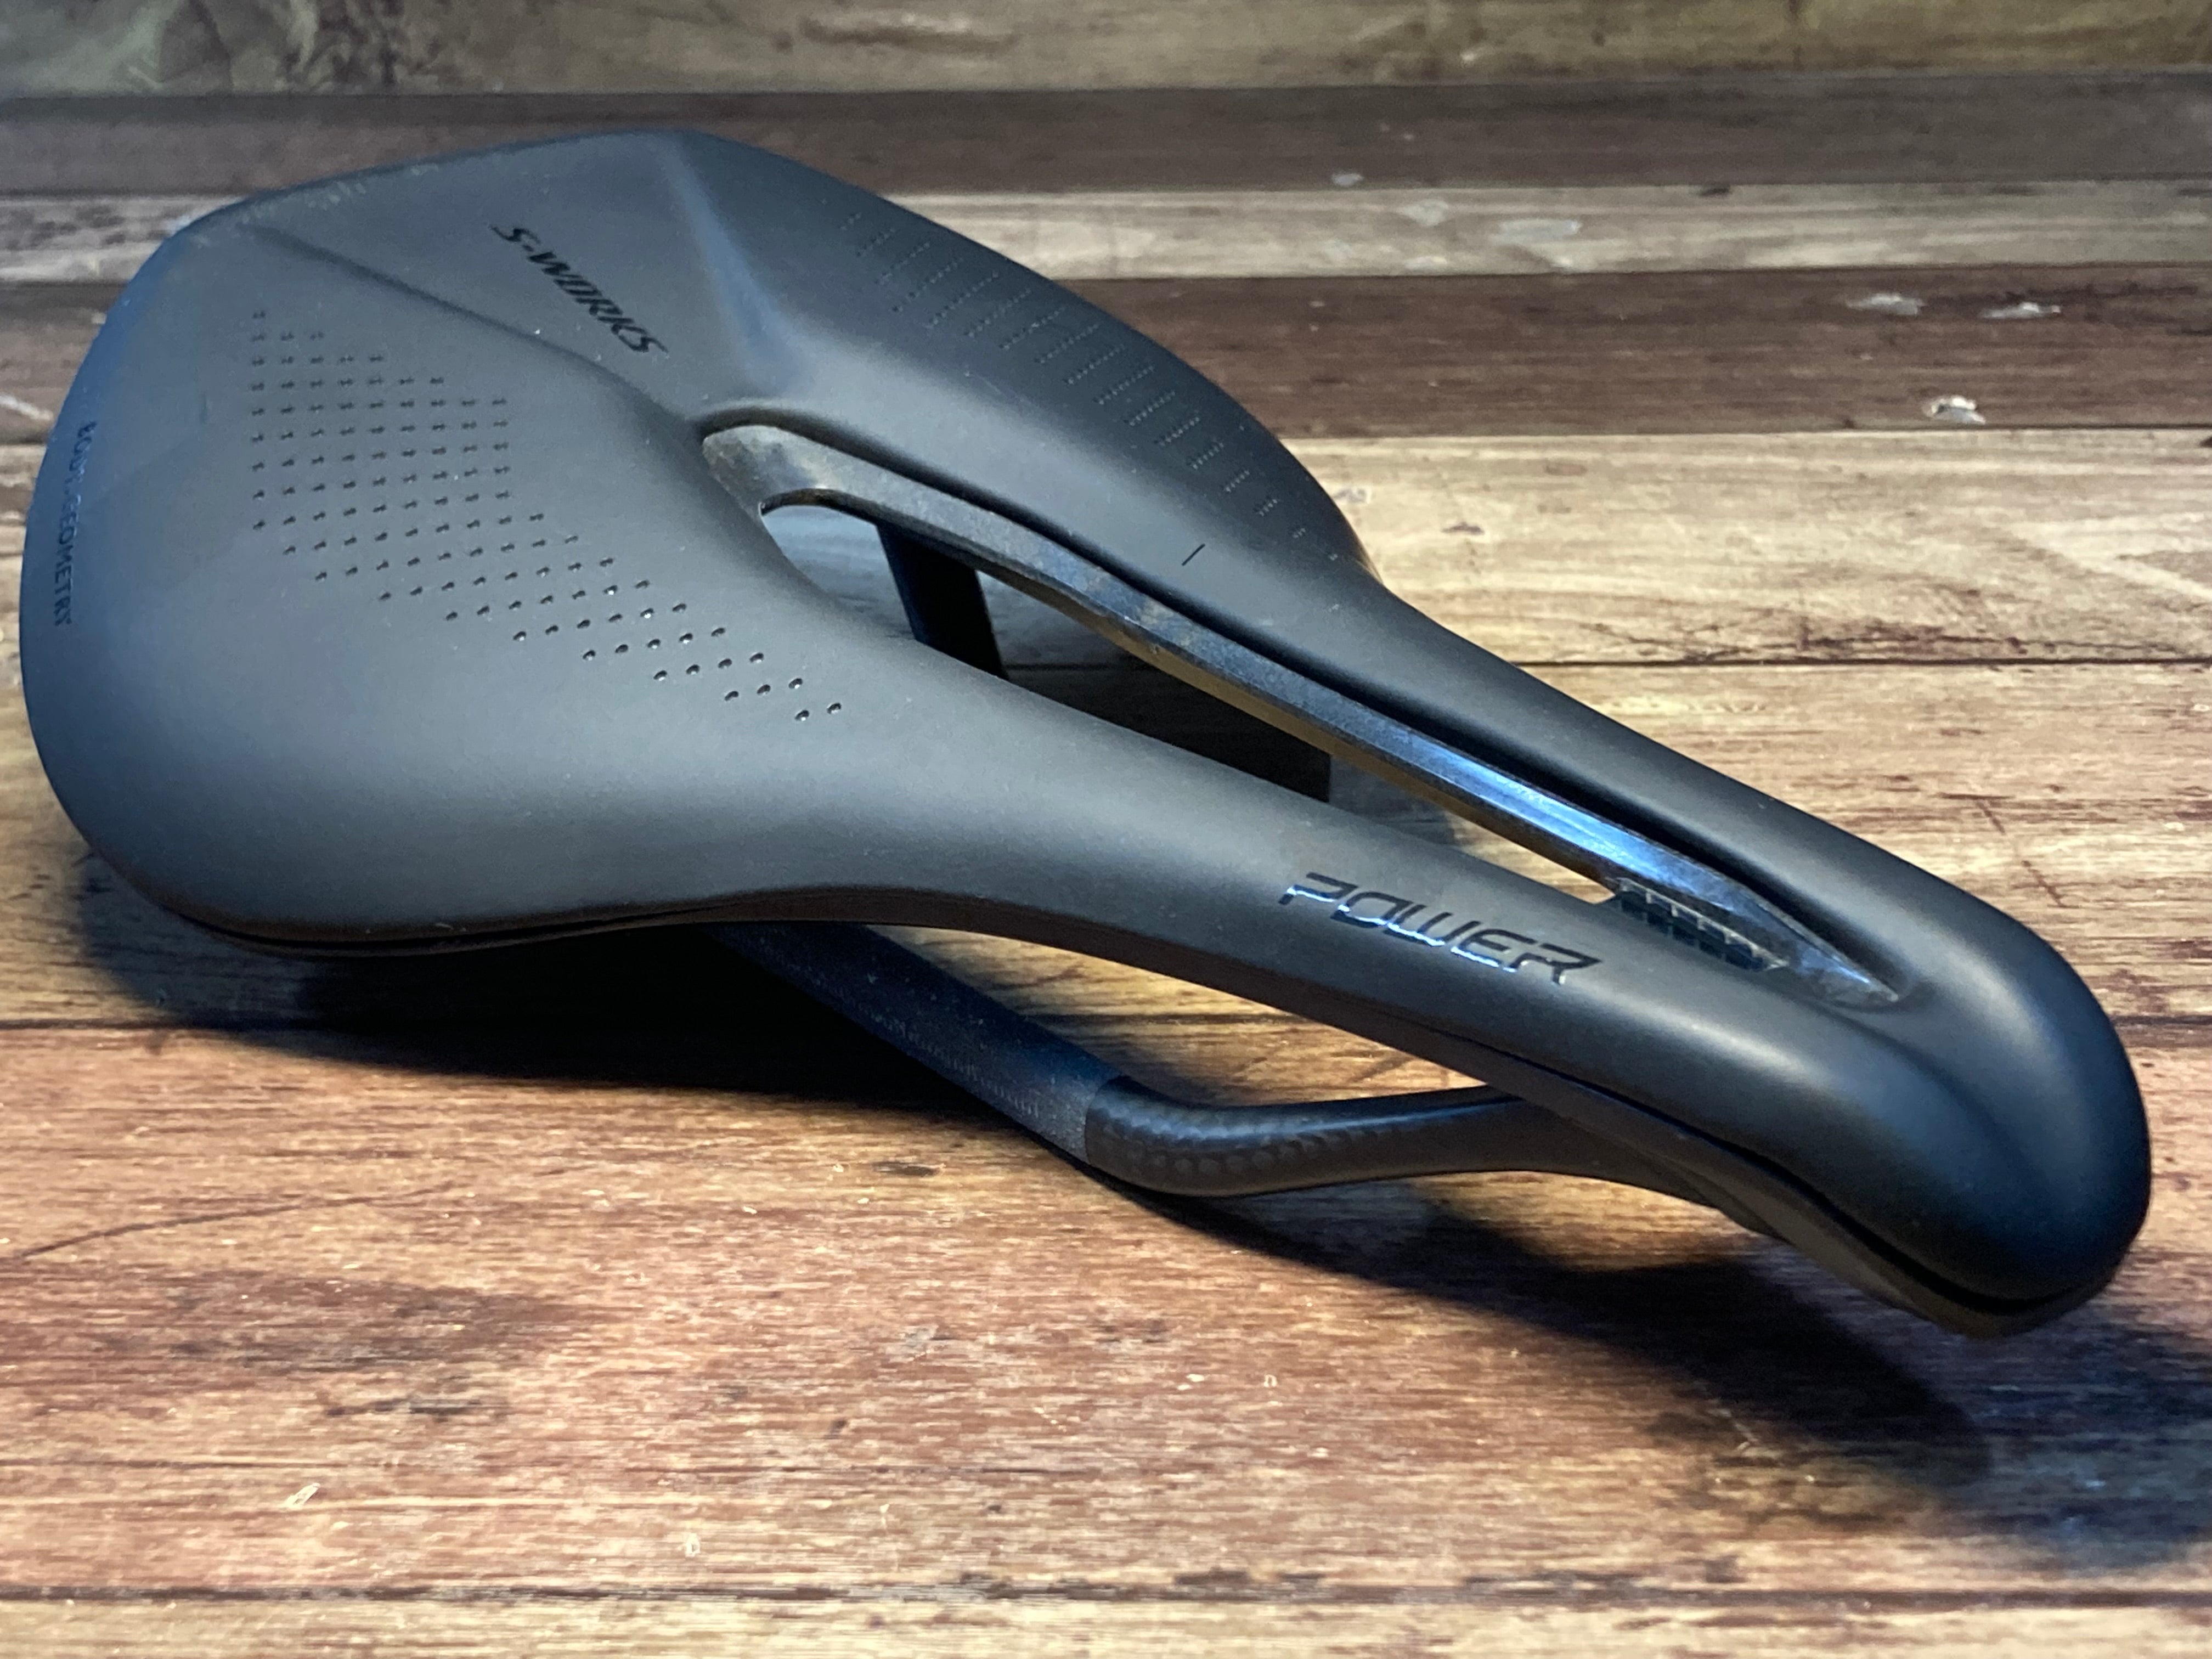 SPECIALIZED スペシャライズド S-WORKS TOUPE CARBON SADDLE サドル ...